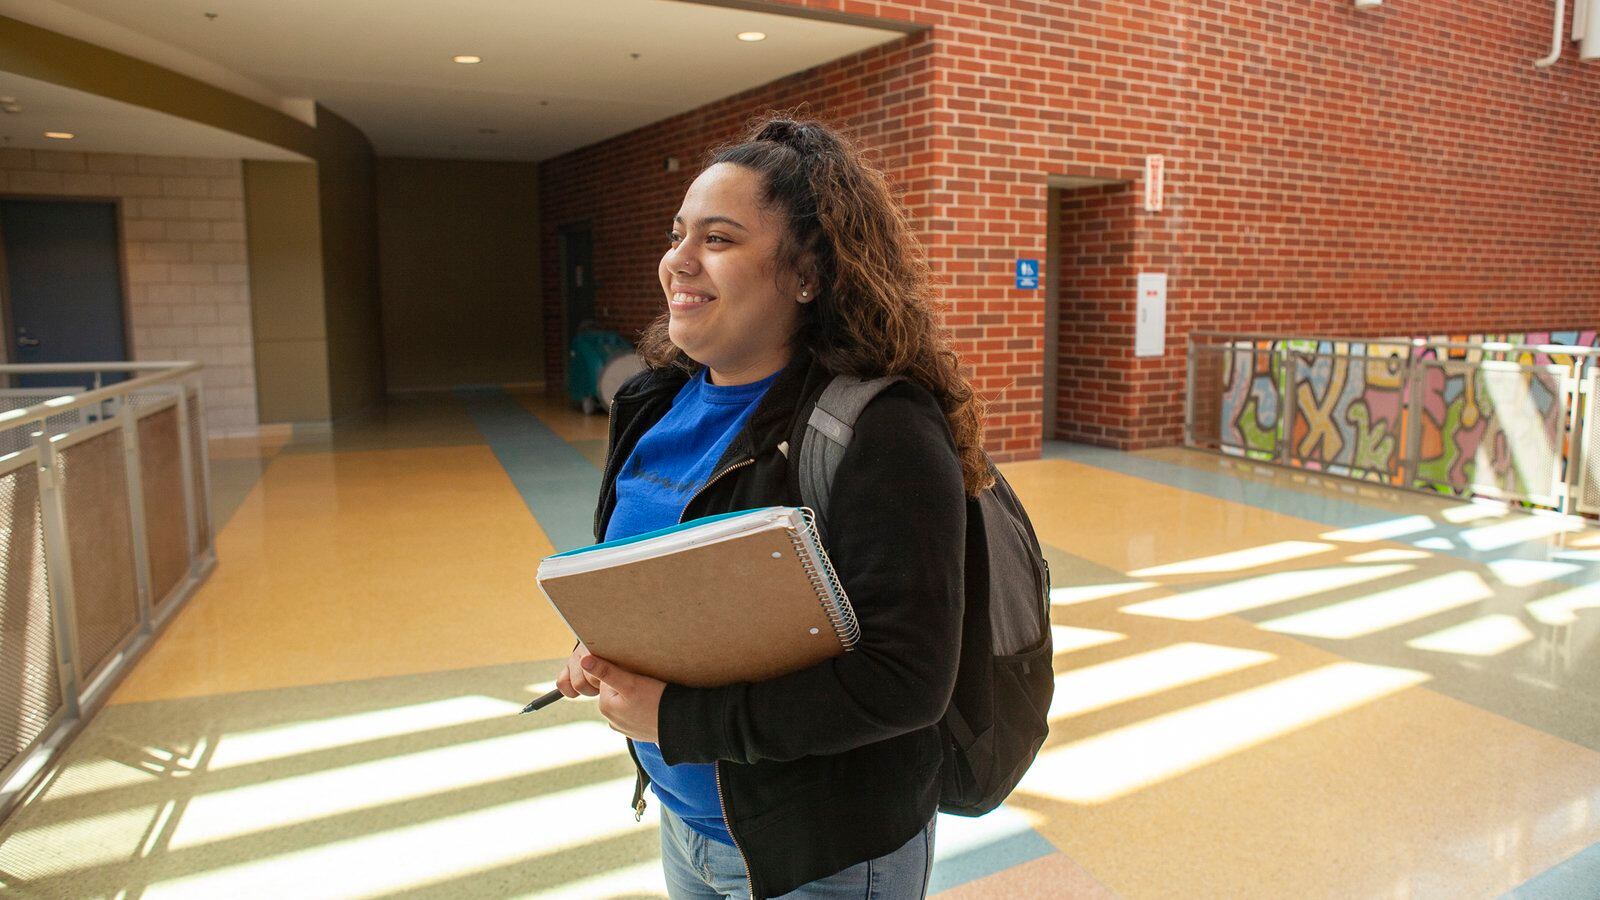 Itzayanna walks in the hallway at North Grand High School in Chicago. Photo by Stacey Rupolo/Chalkbeat; taken May, 2019